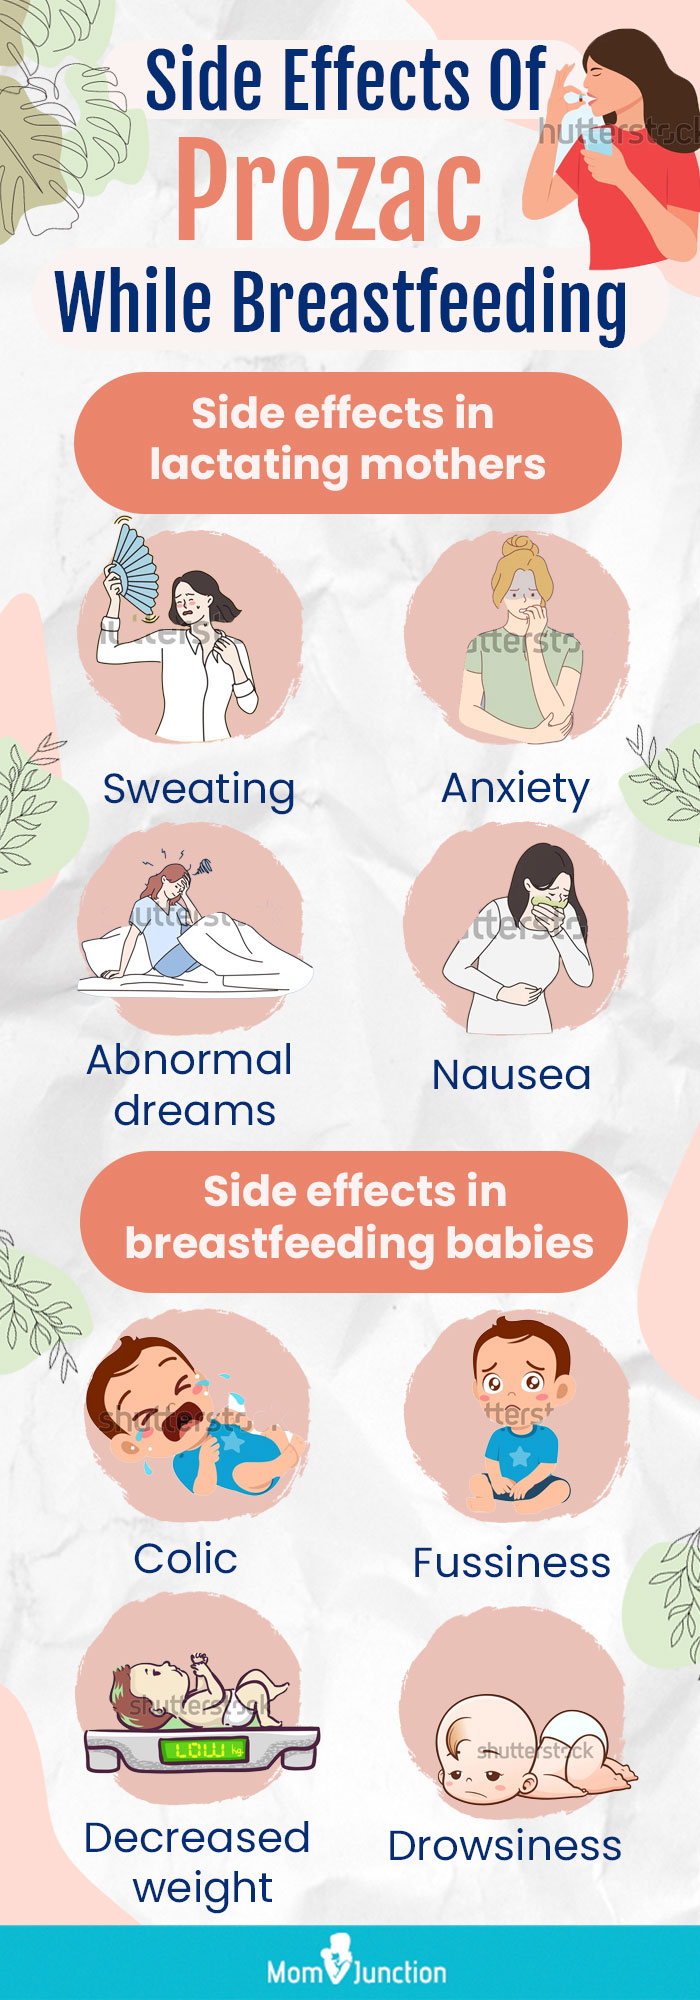 side effects of prozac while breastfeeding (infographic)